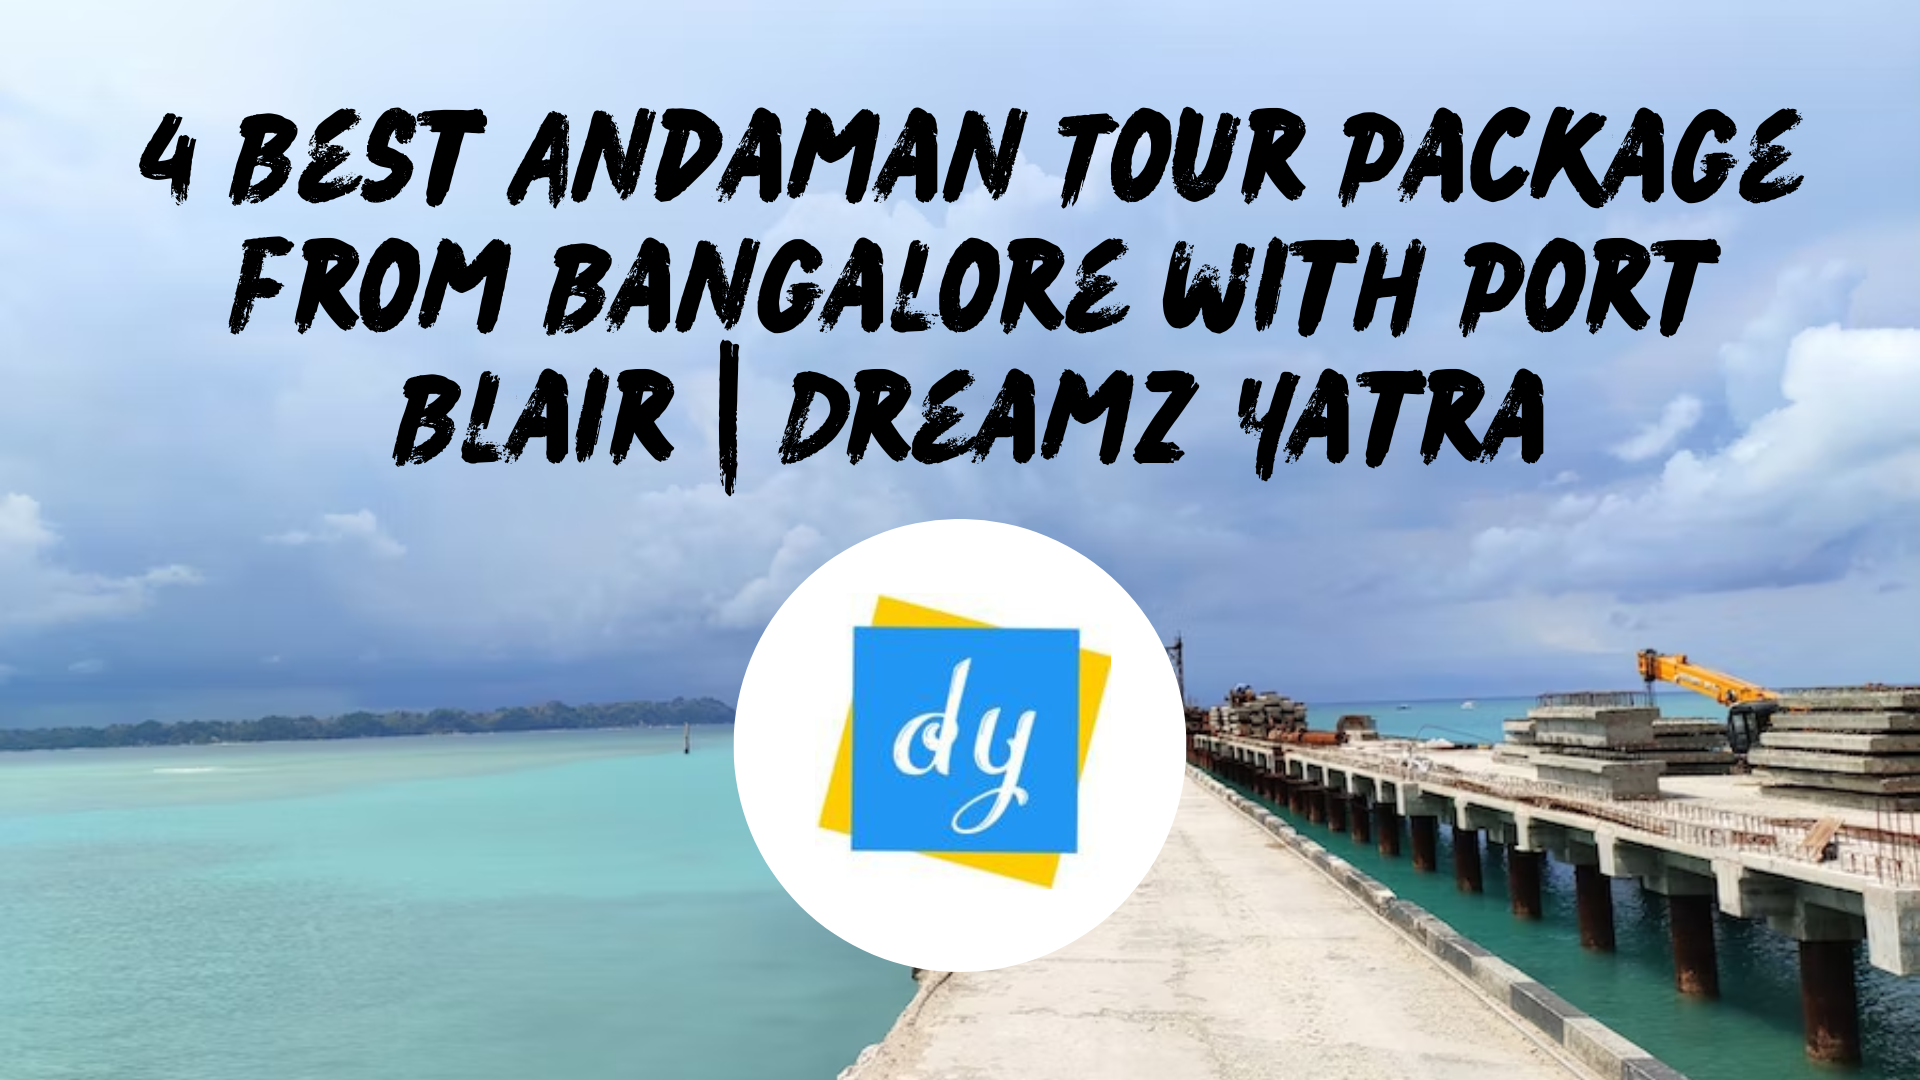 andaman package tour from bangalore